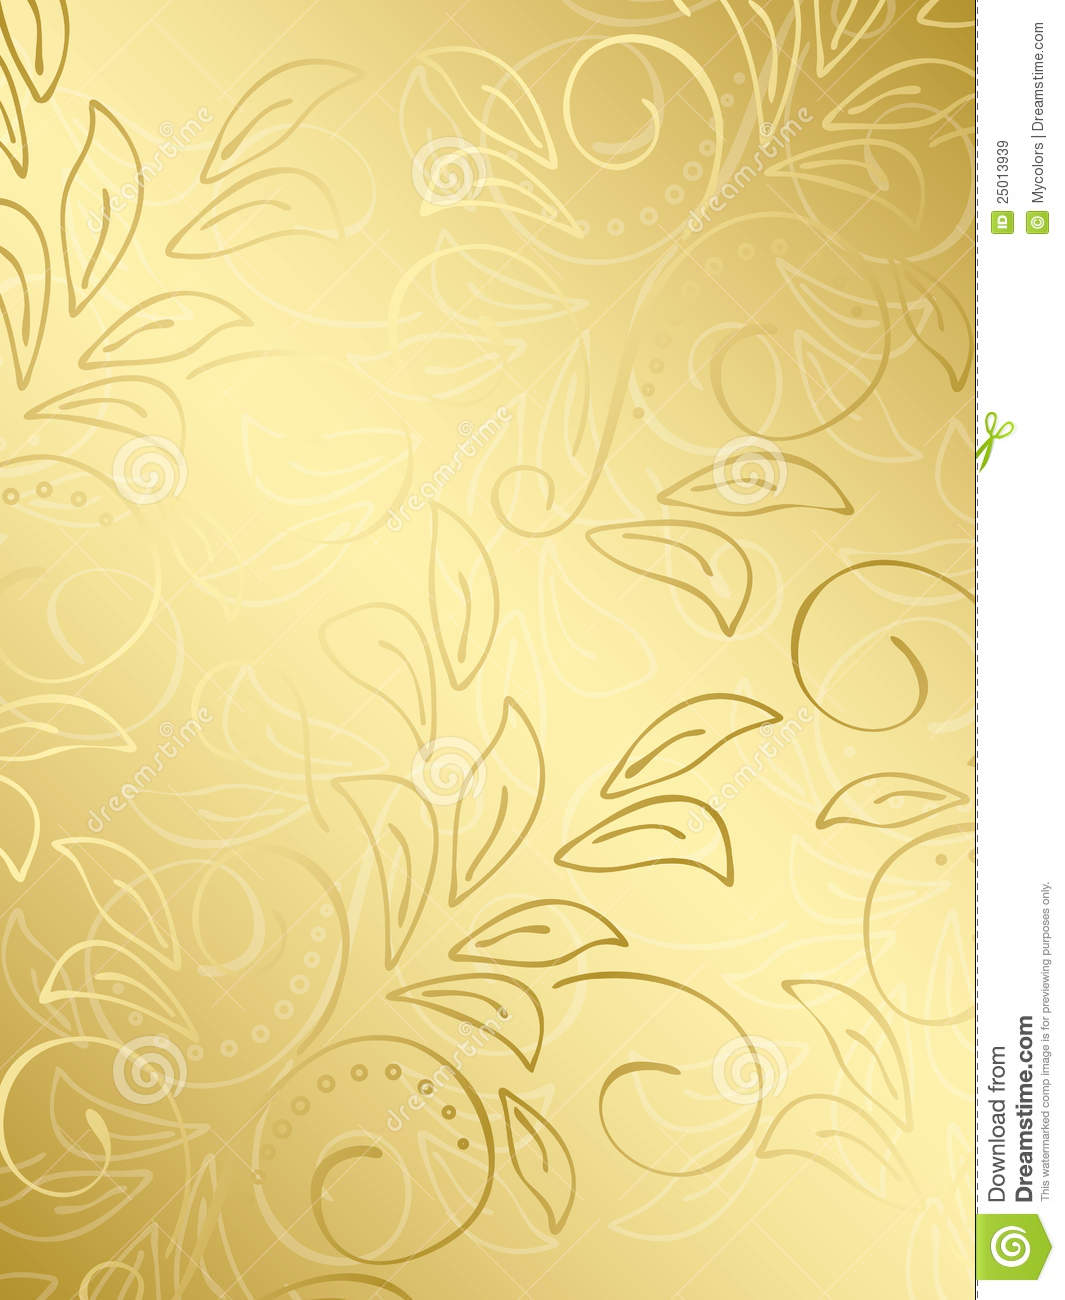 Blue and Gold Gradient Vector